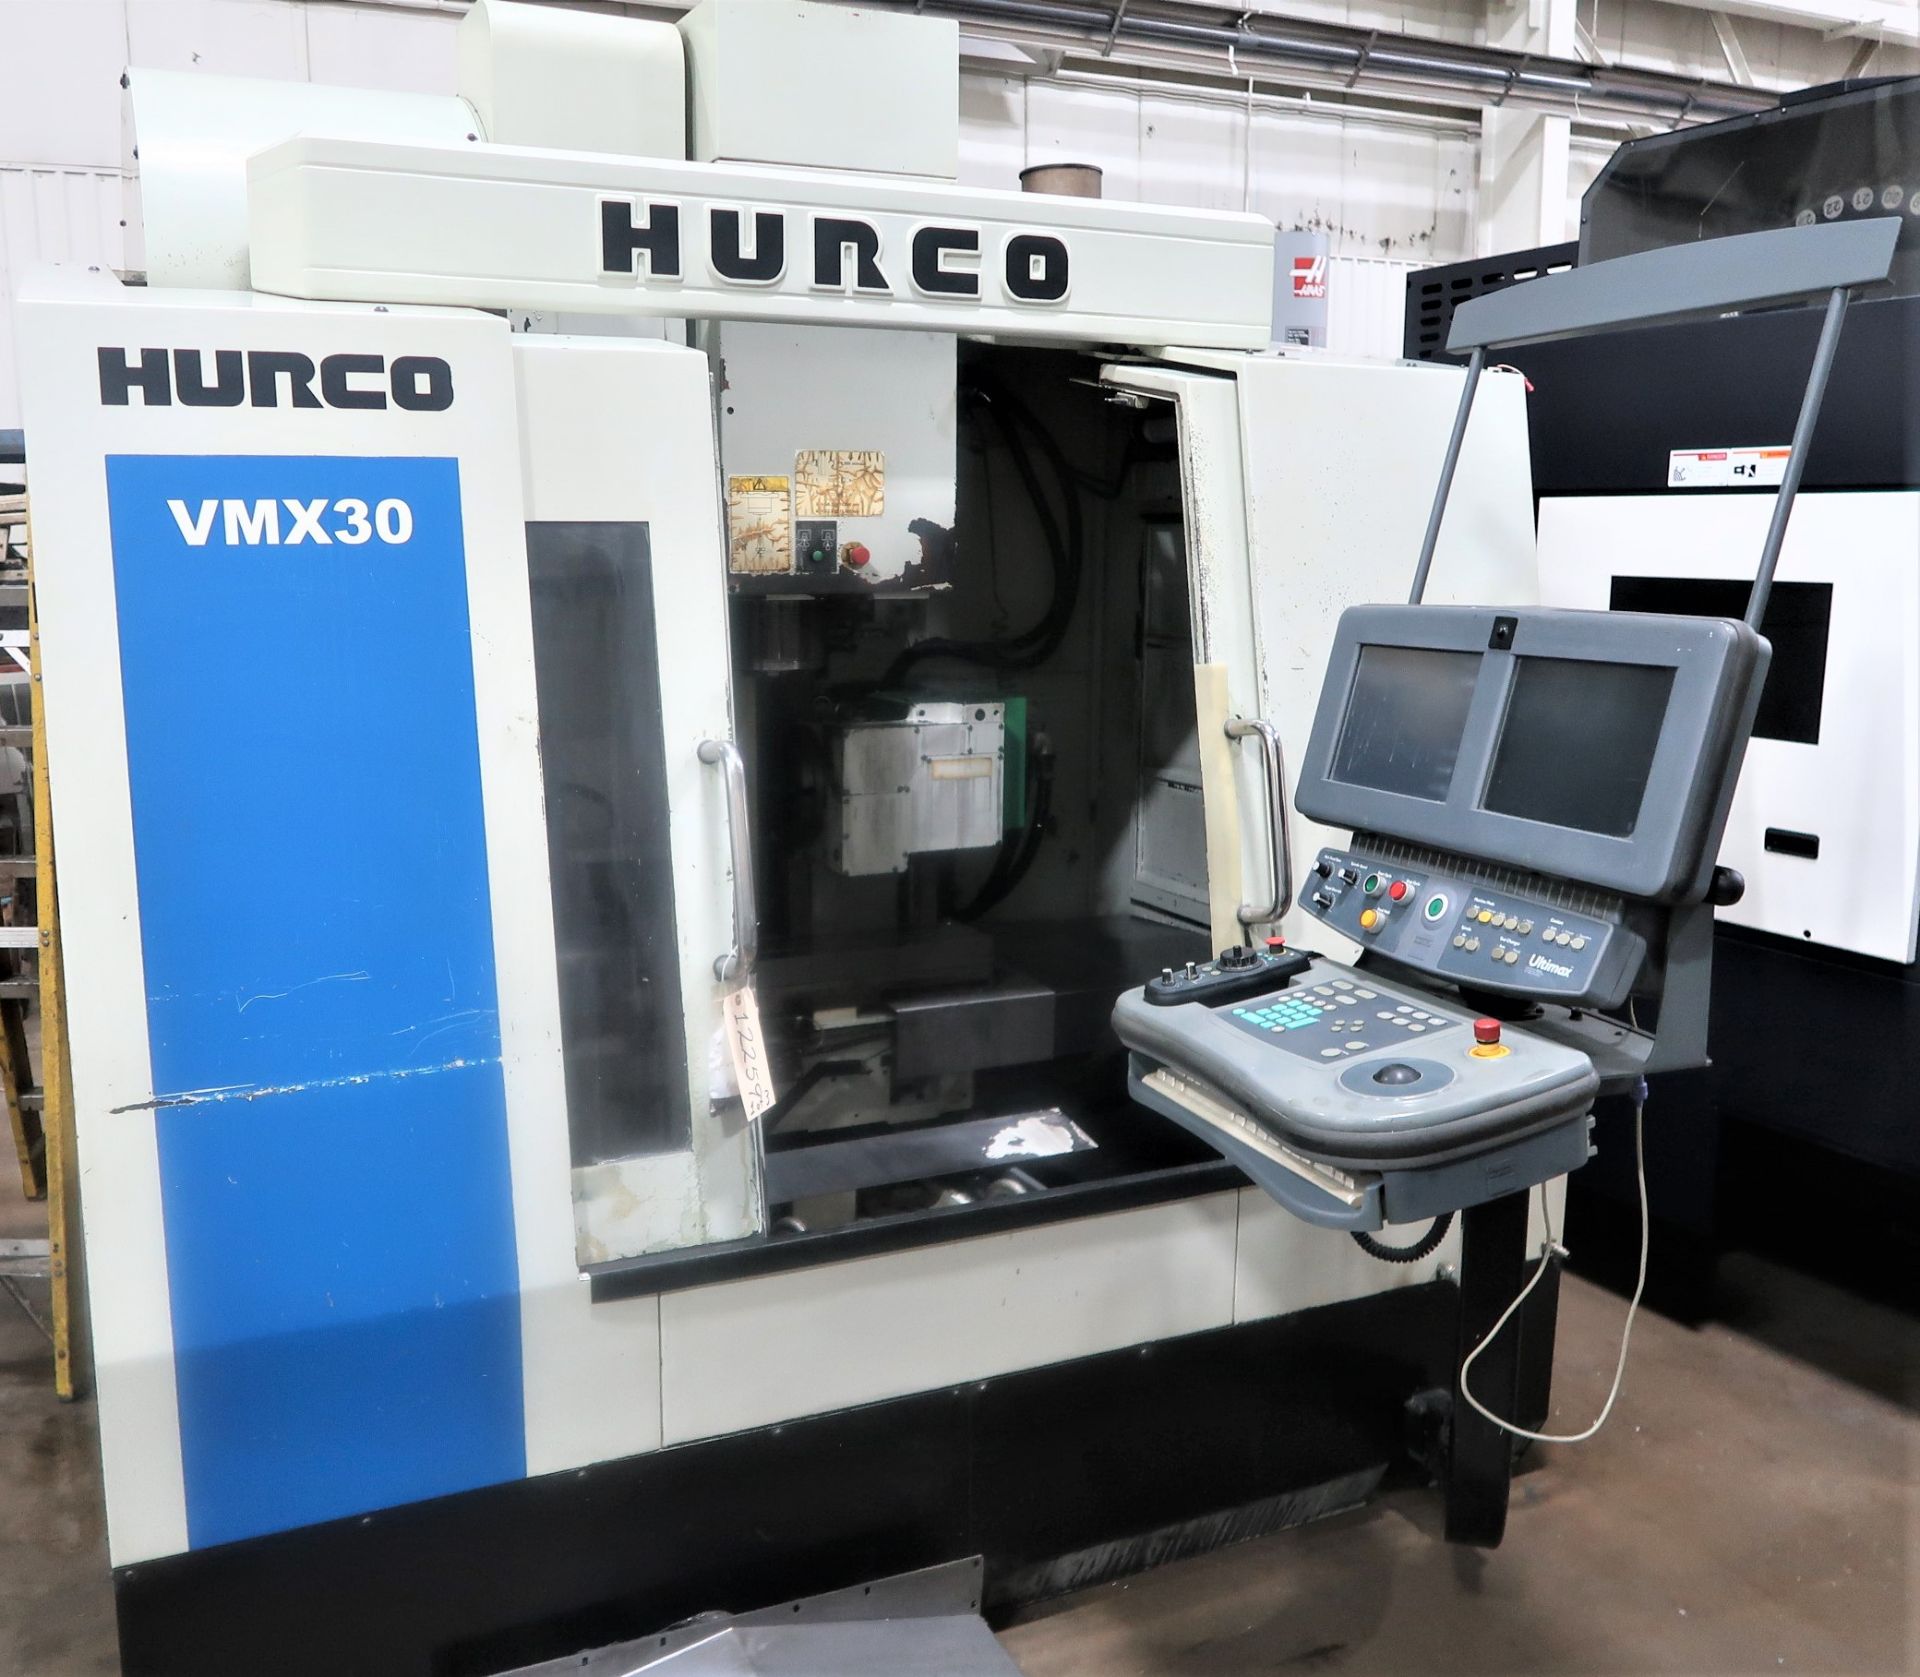 Hurco VMX-30 4-Axis CNC Vertical Machining Center, New 2005 - Image 4 of 7